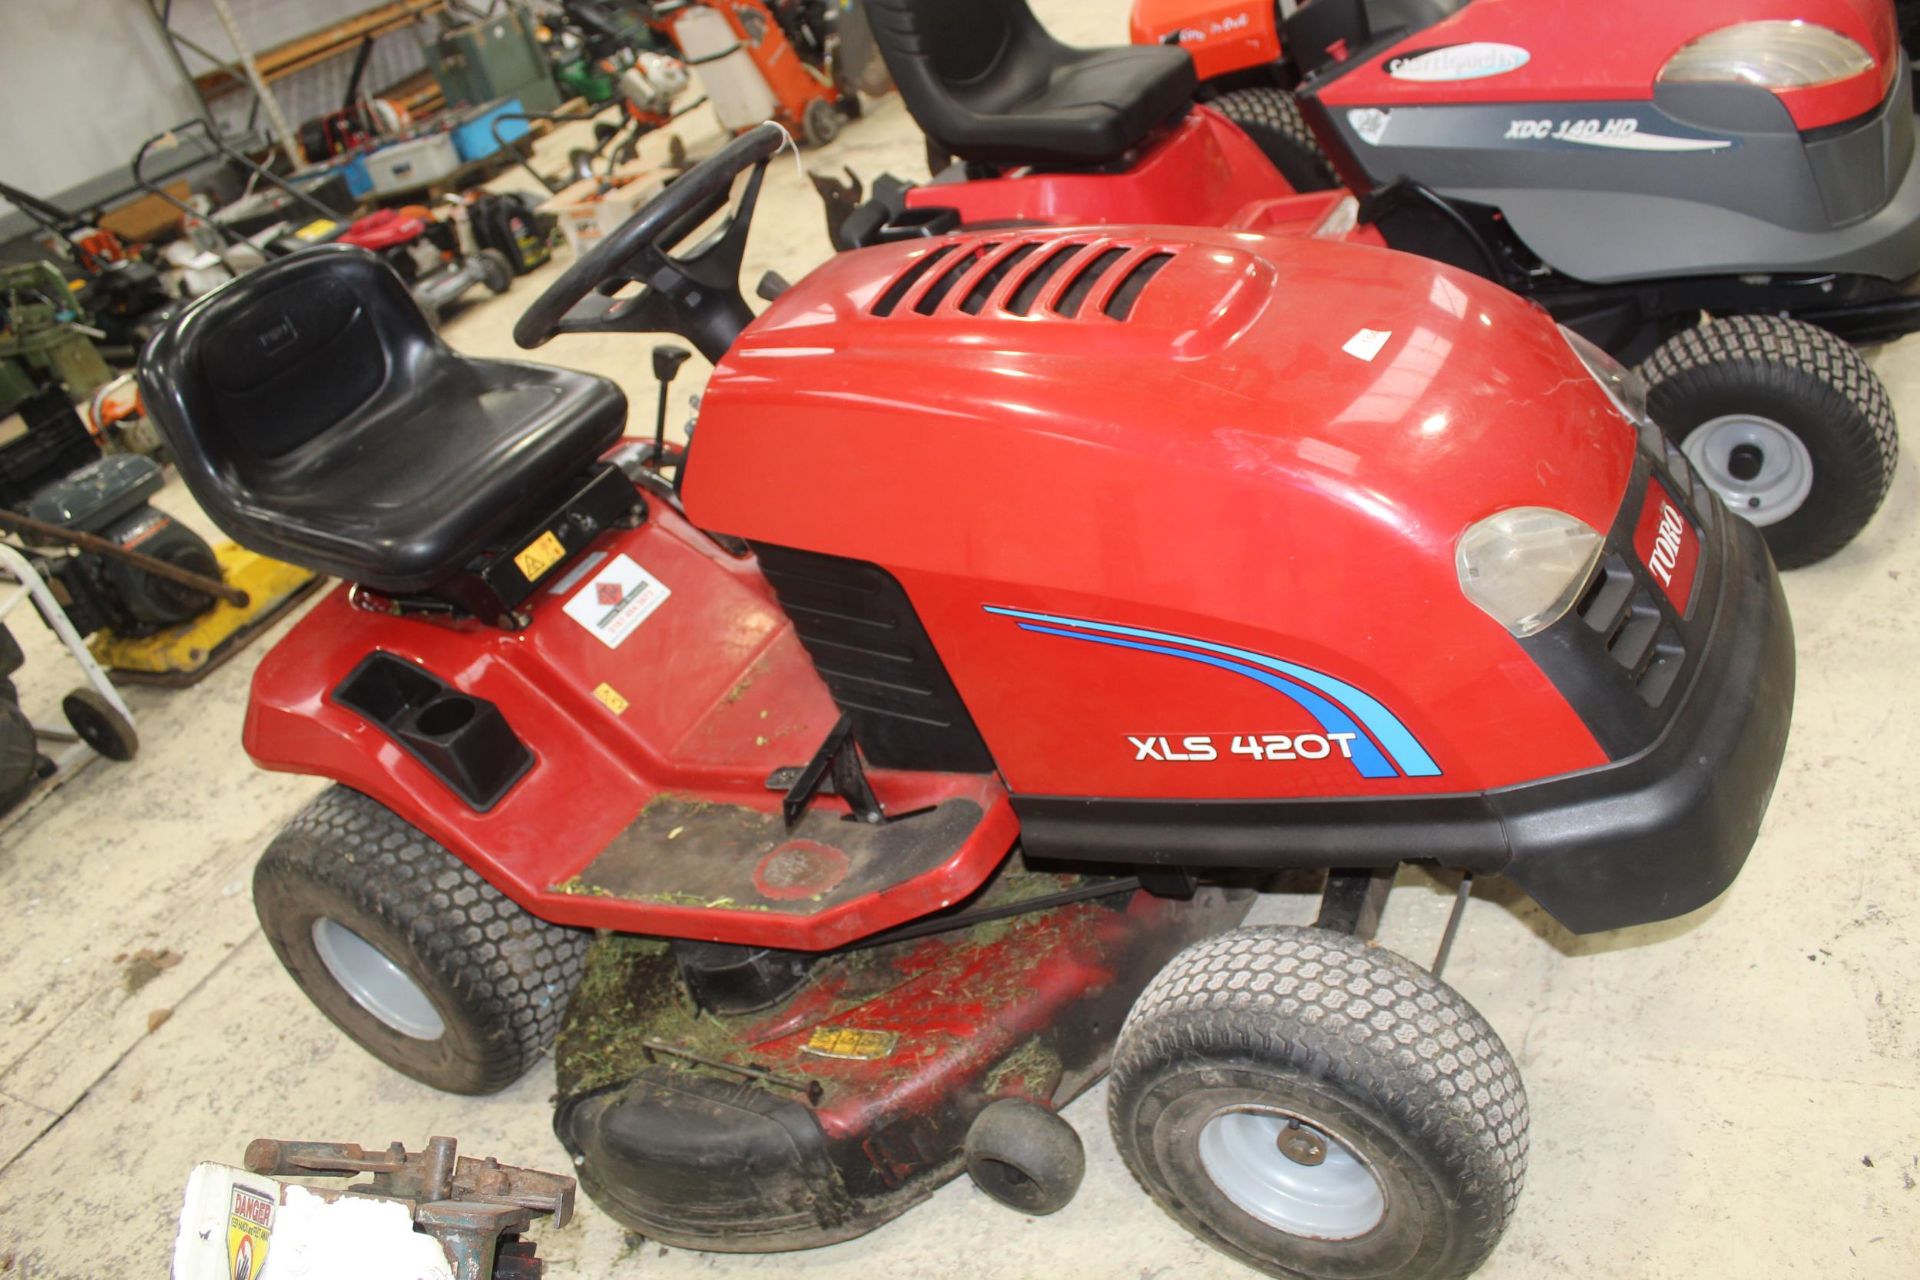 MTD CUB CADET RIDE ON MOWER WITH BRIGGS & STRATTON VANGUARD V-TWIN 20HP ENGINE + VAT KEY IN OFFICE - Image 3 of 6